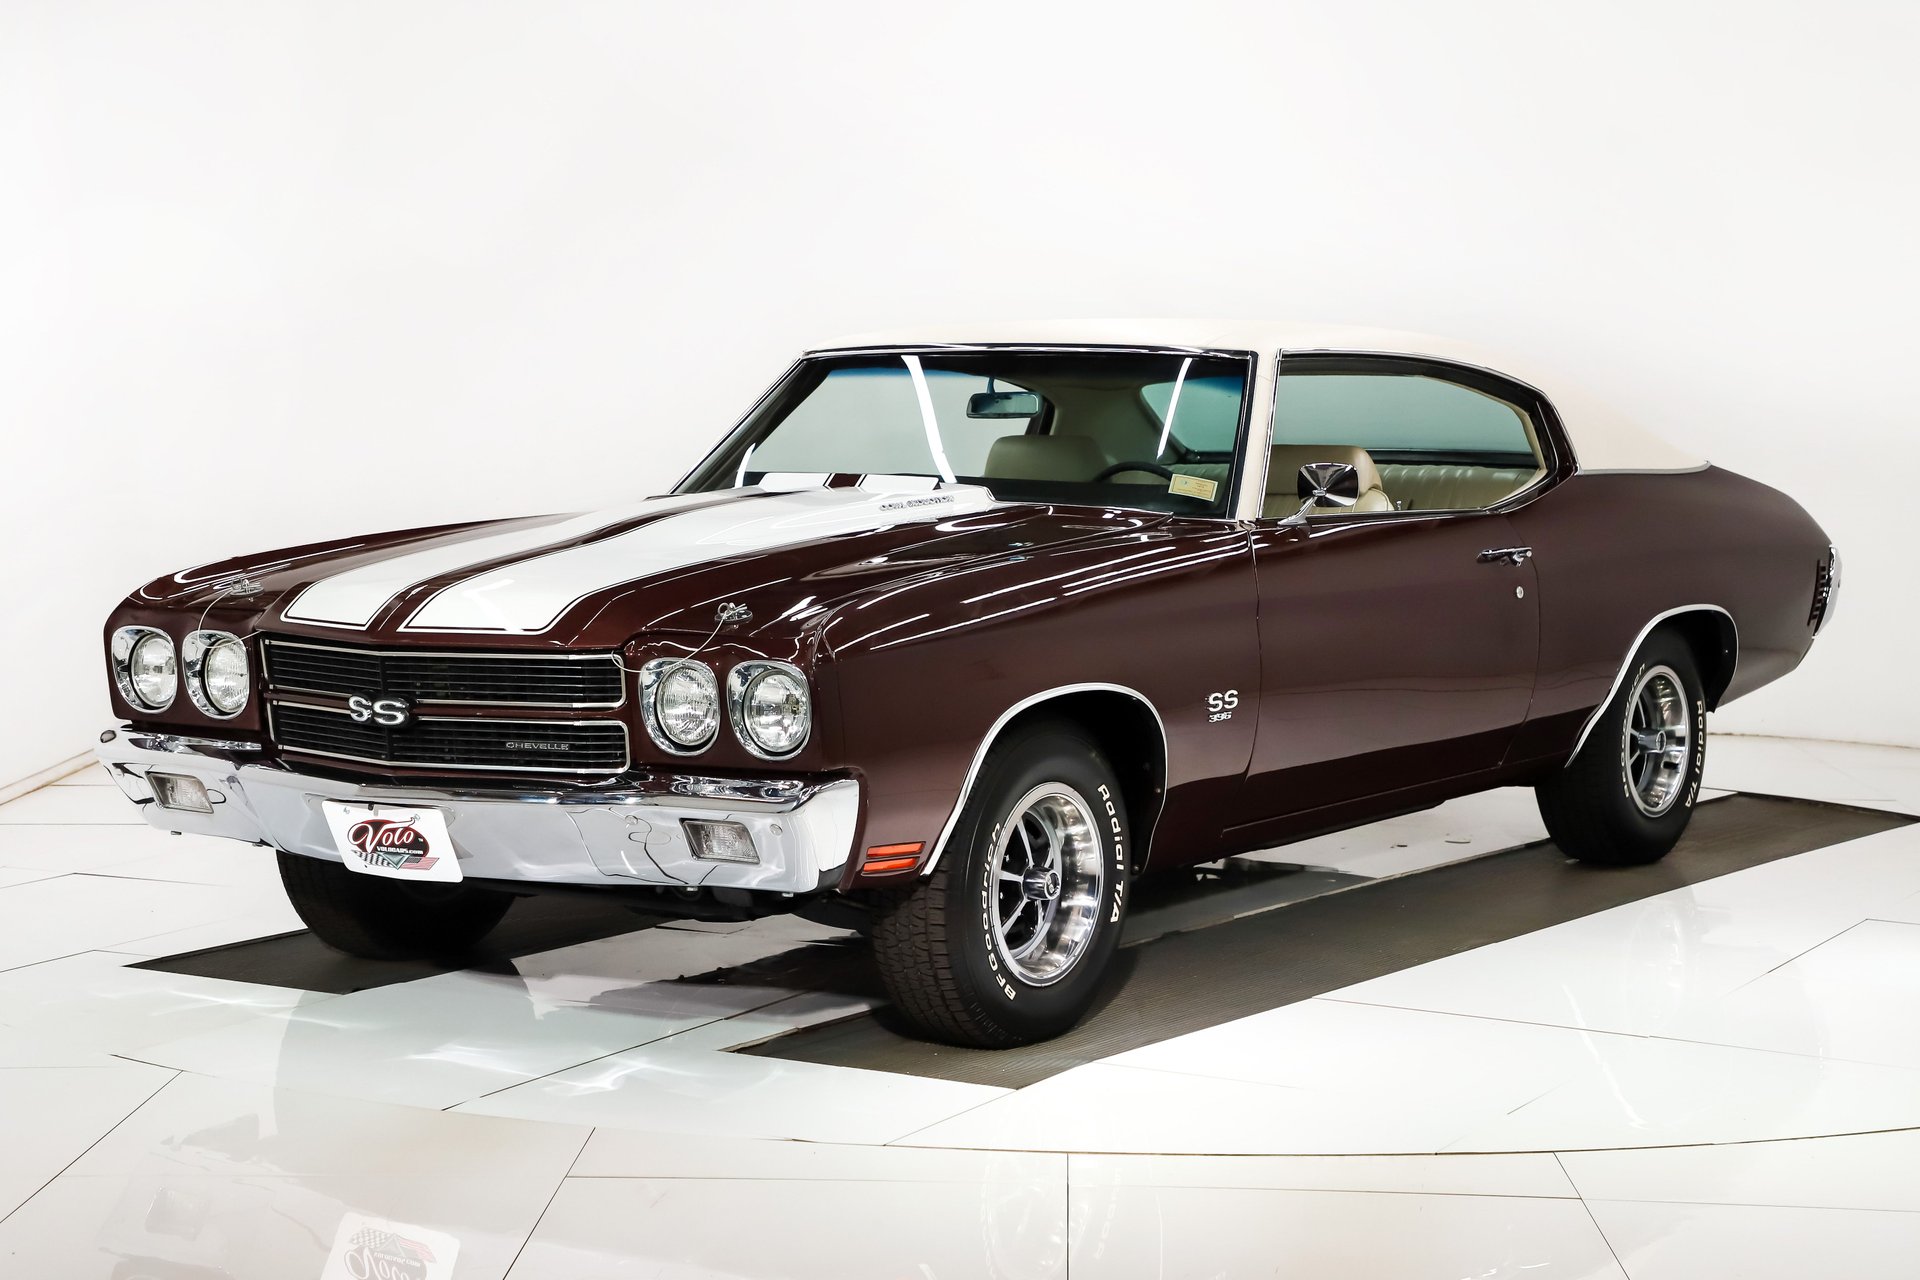 Unveiling the 1970 Chevrolet Chevelle SS